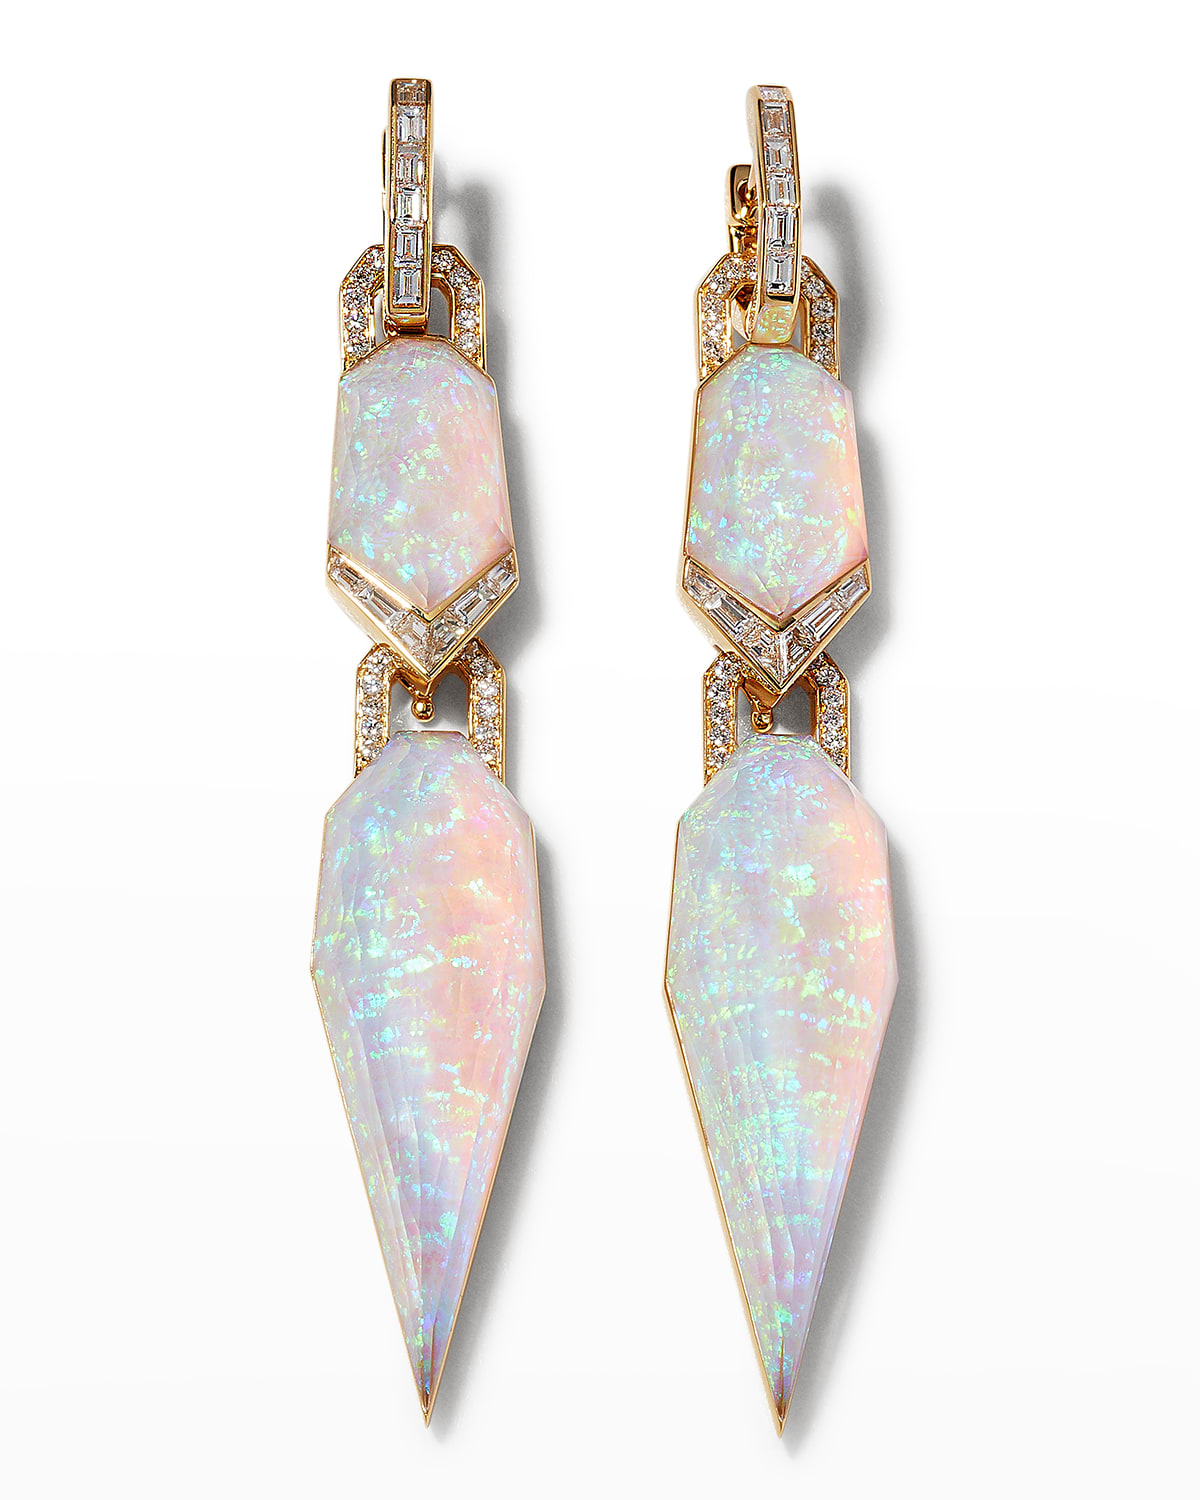 Stephen Webster Multi-way Earrings With White Opalescent Clear Quartz